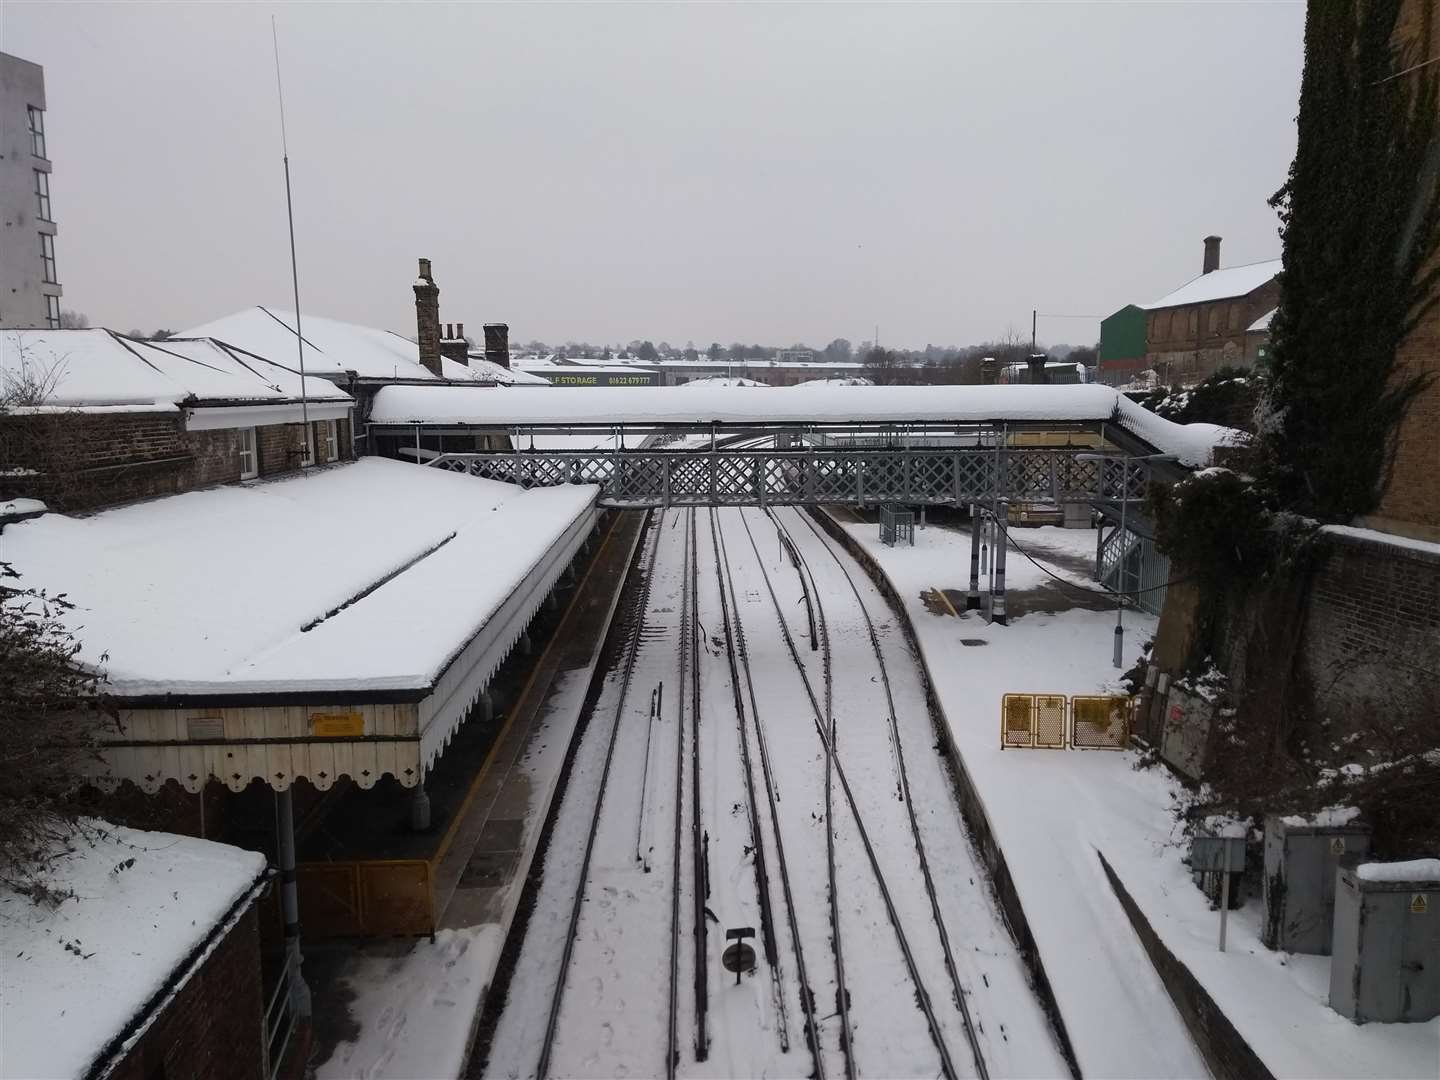 Maidstone West train station was closed as the Medway Valley line shut down for the snow